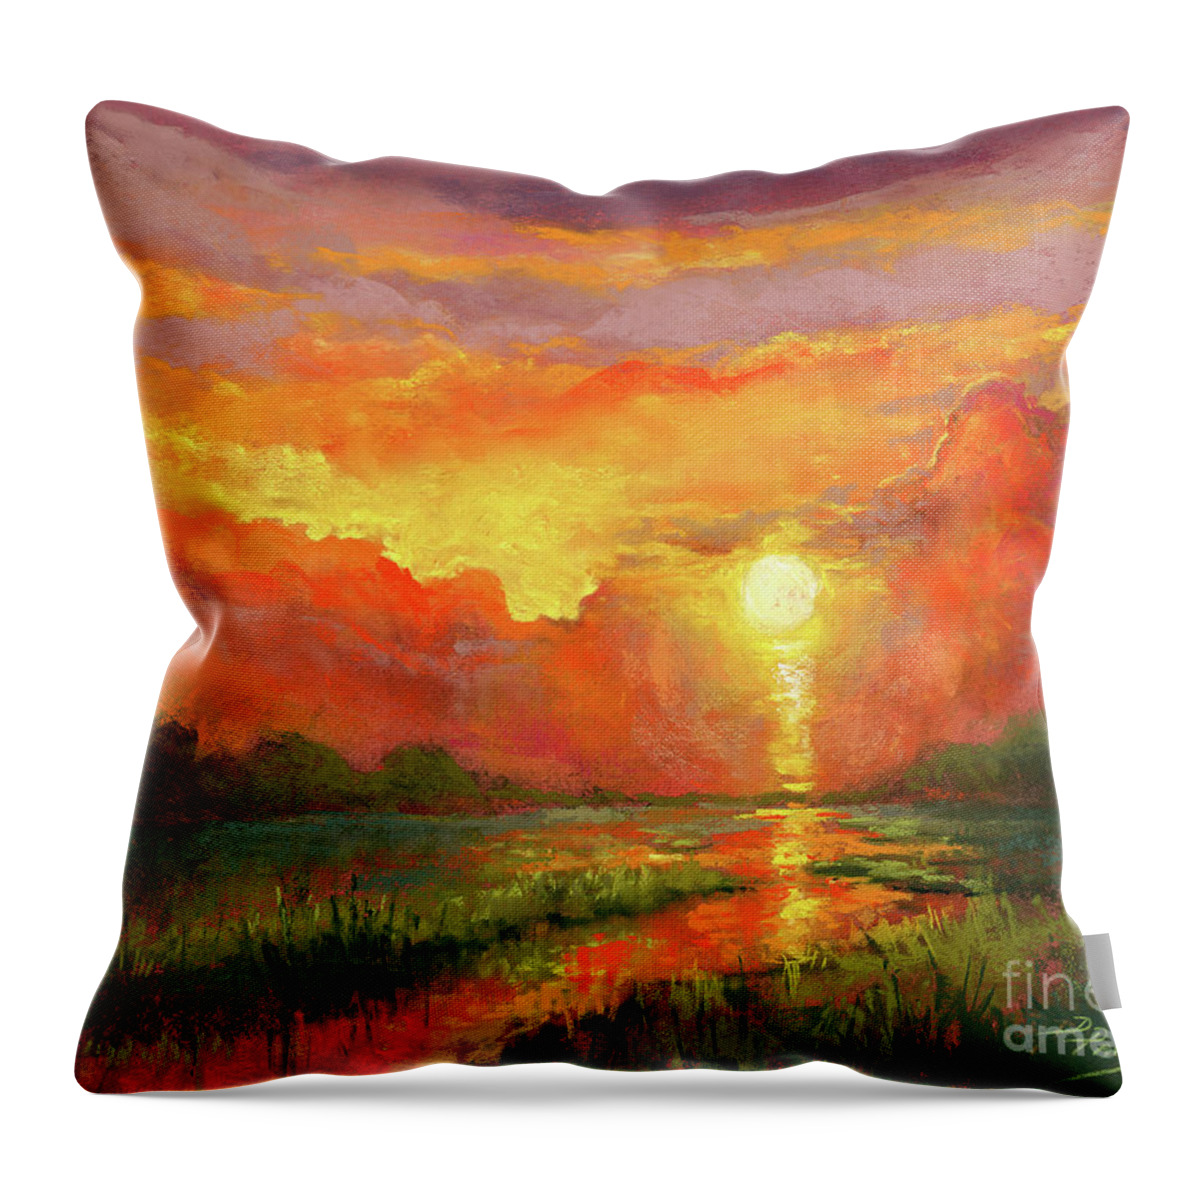 Imagine Throw Pillow featuring the painting Imagine by Dianne Parks